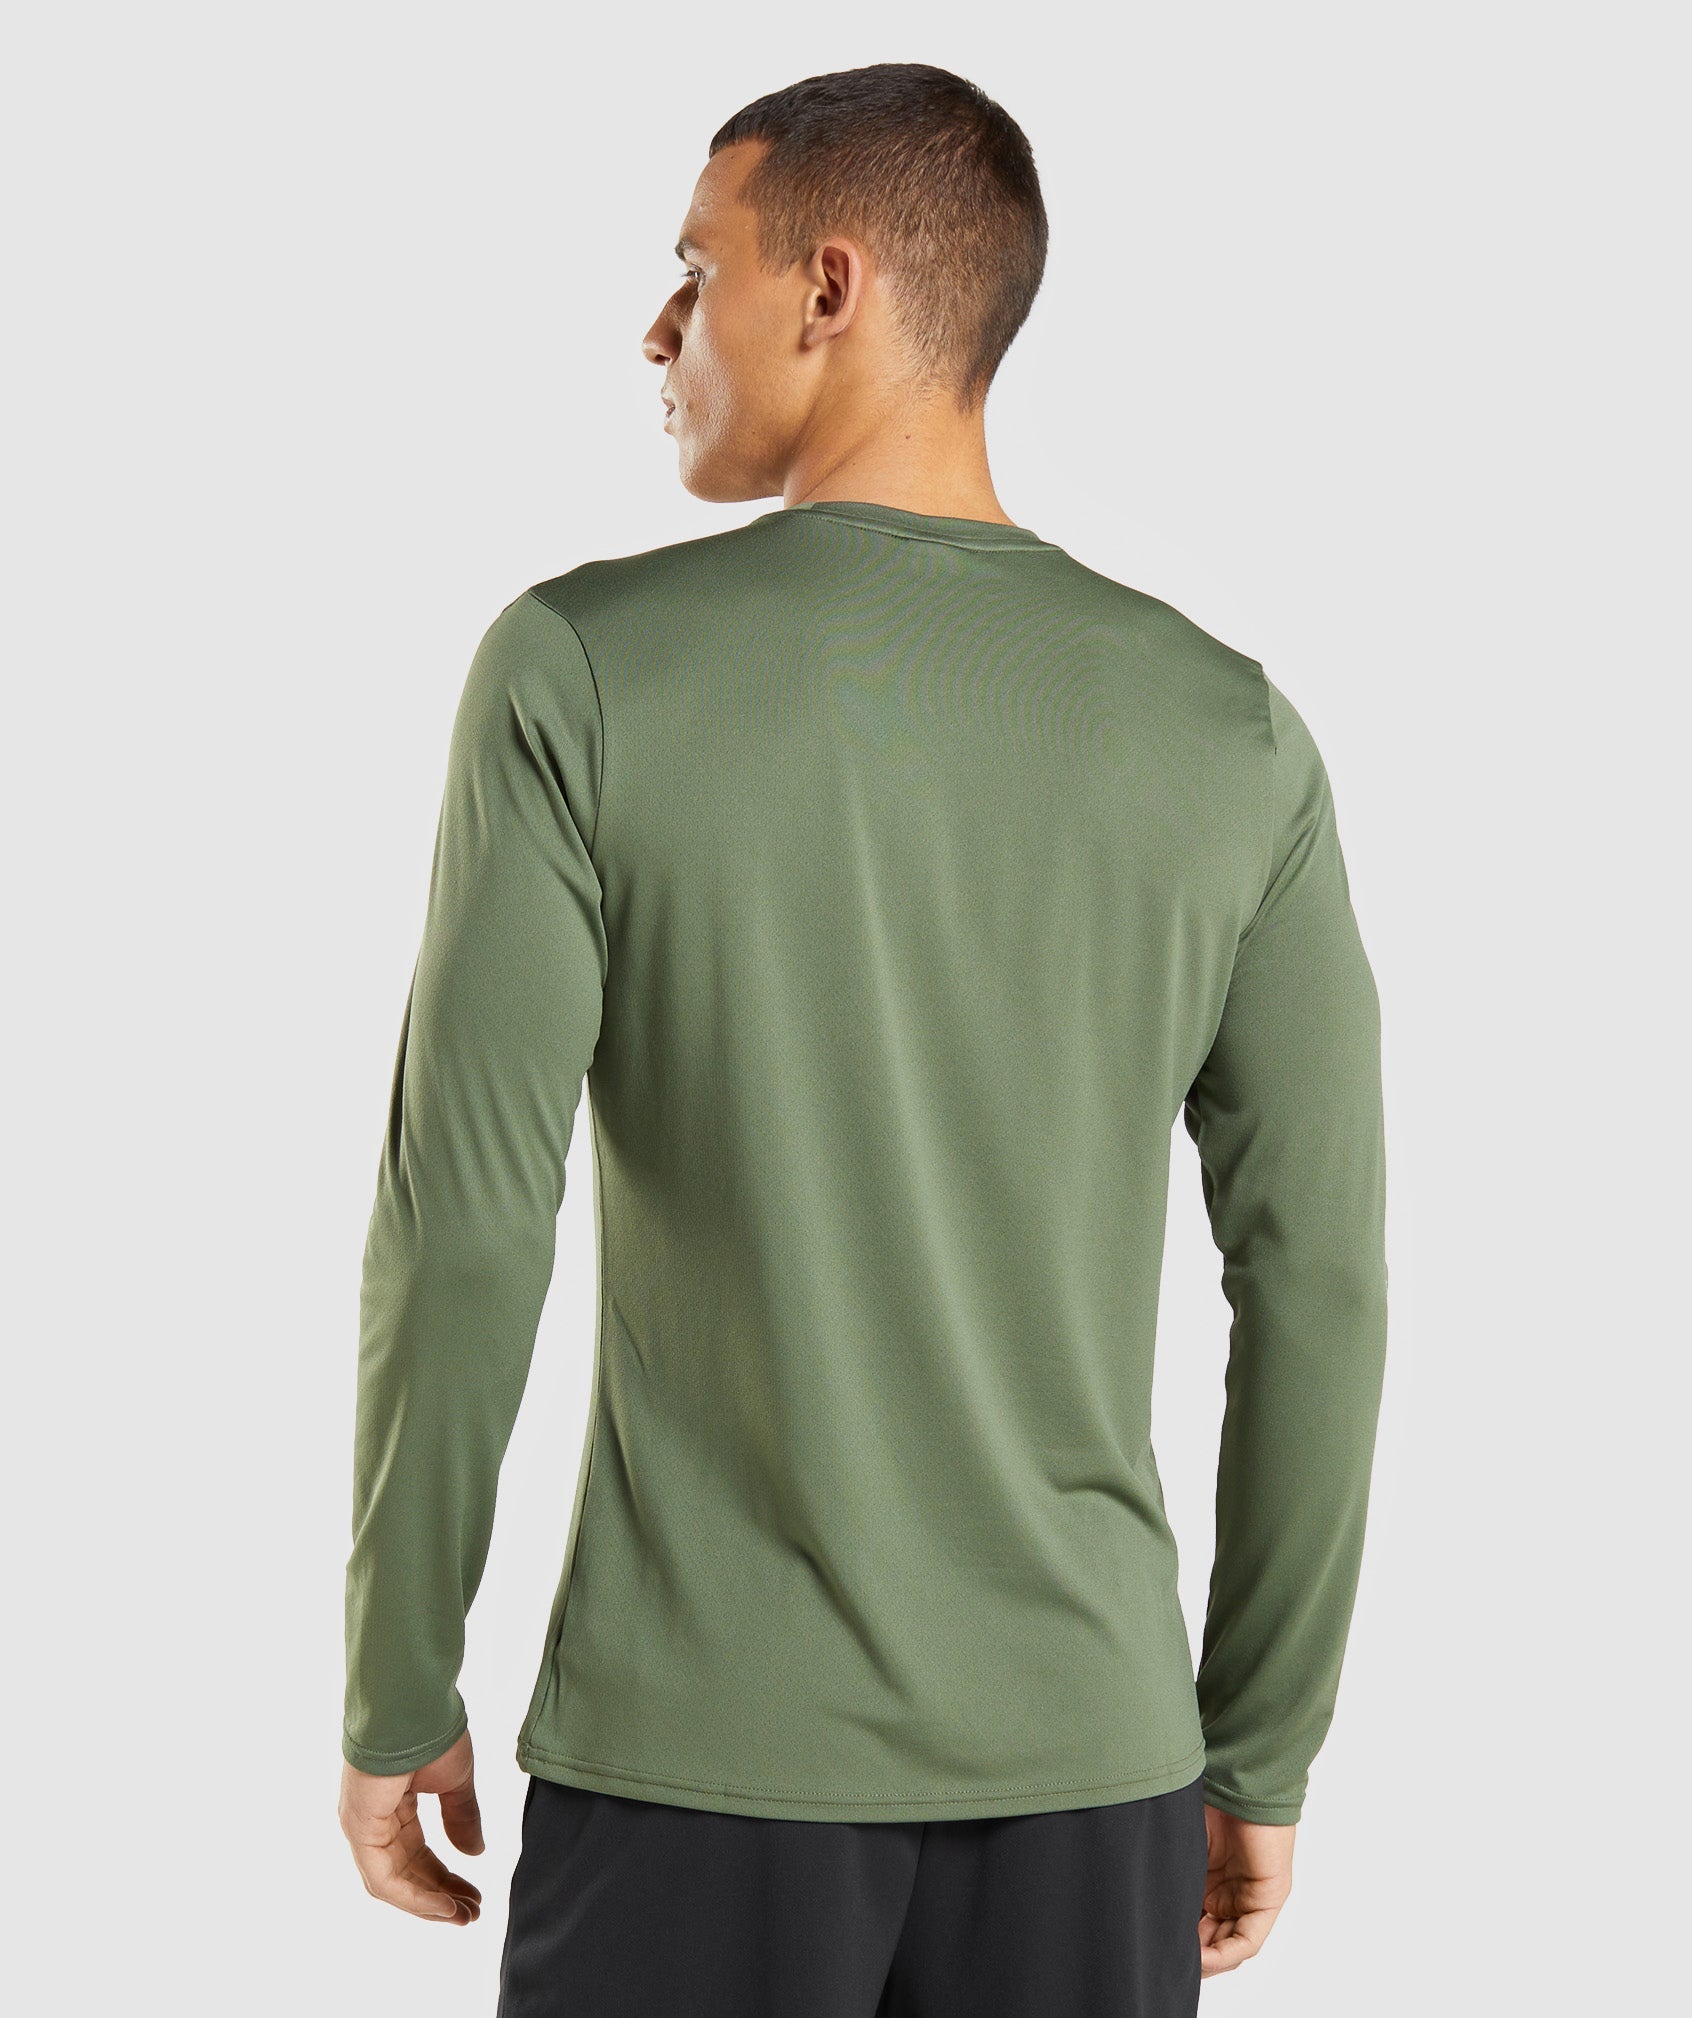 Arrival Long Sleeve T-Shirt in Core Olive - view 2